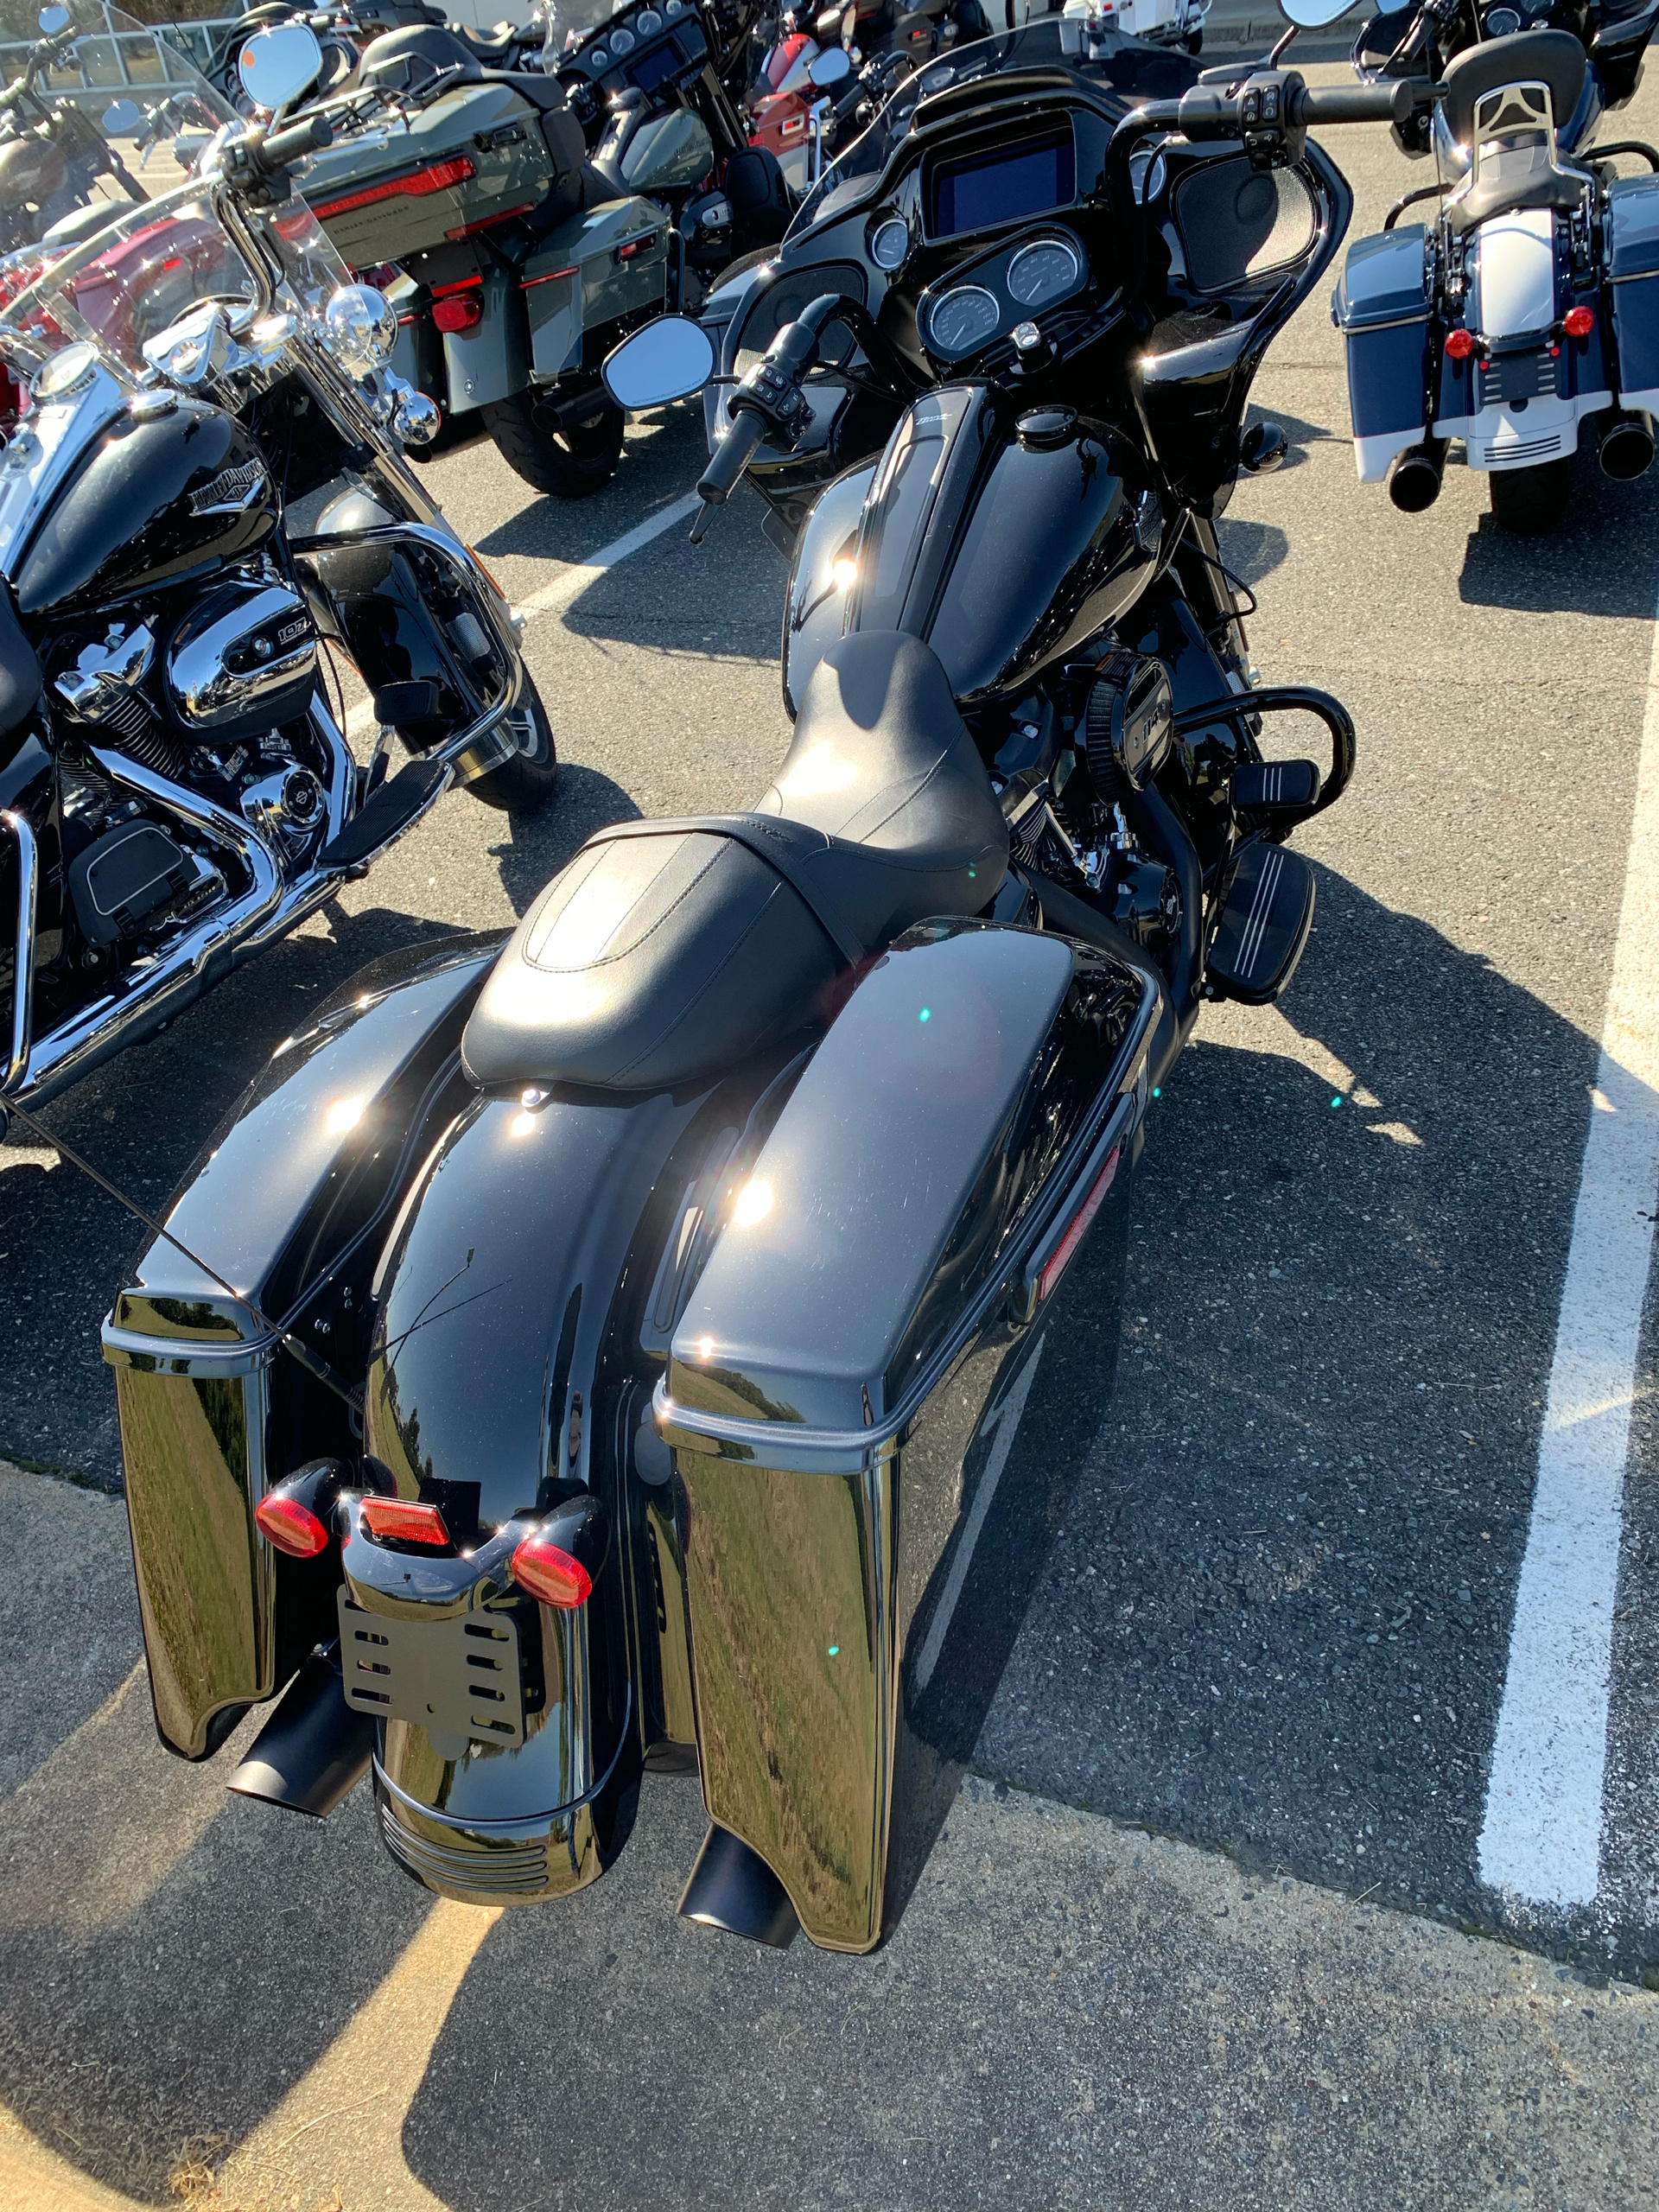 2021 Harley-Davidson ROAD GLIDE SPECIAL in Dumfries, Virginia - Photo 2